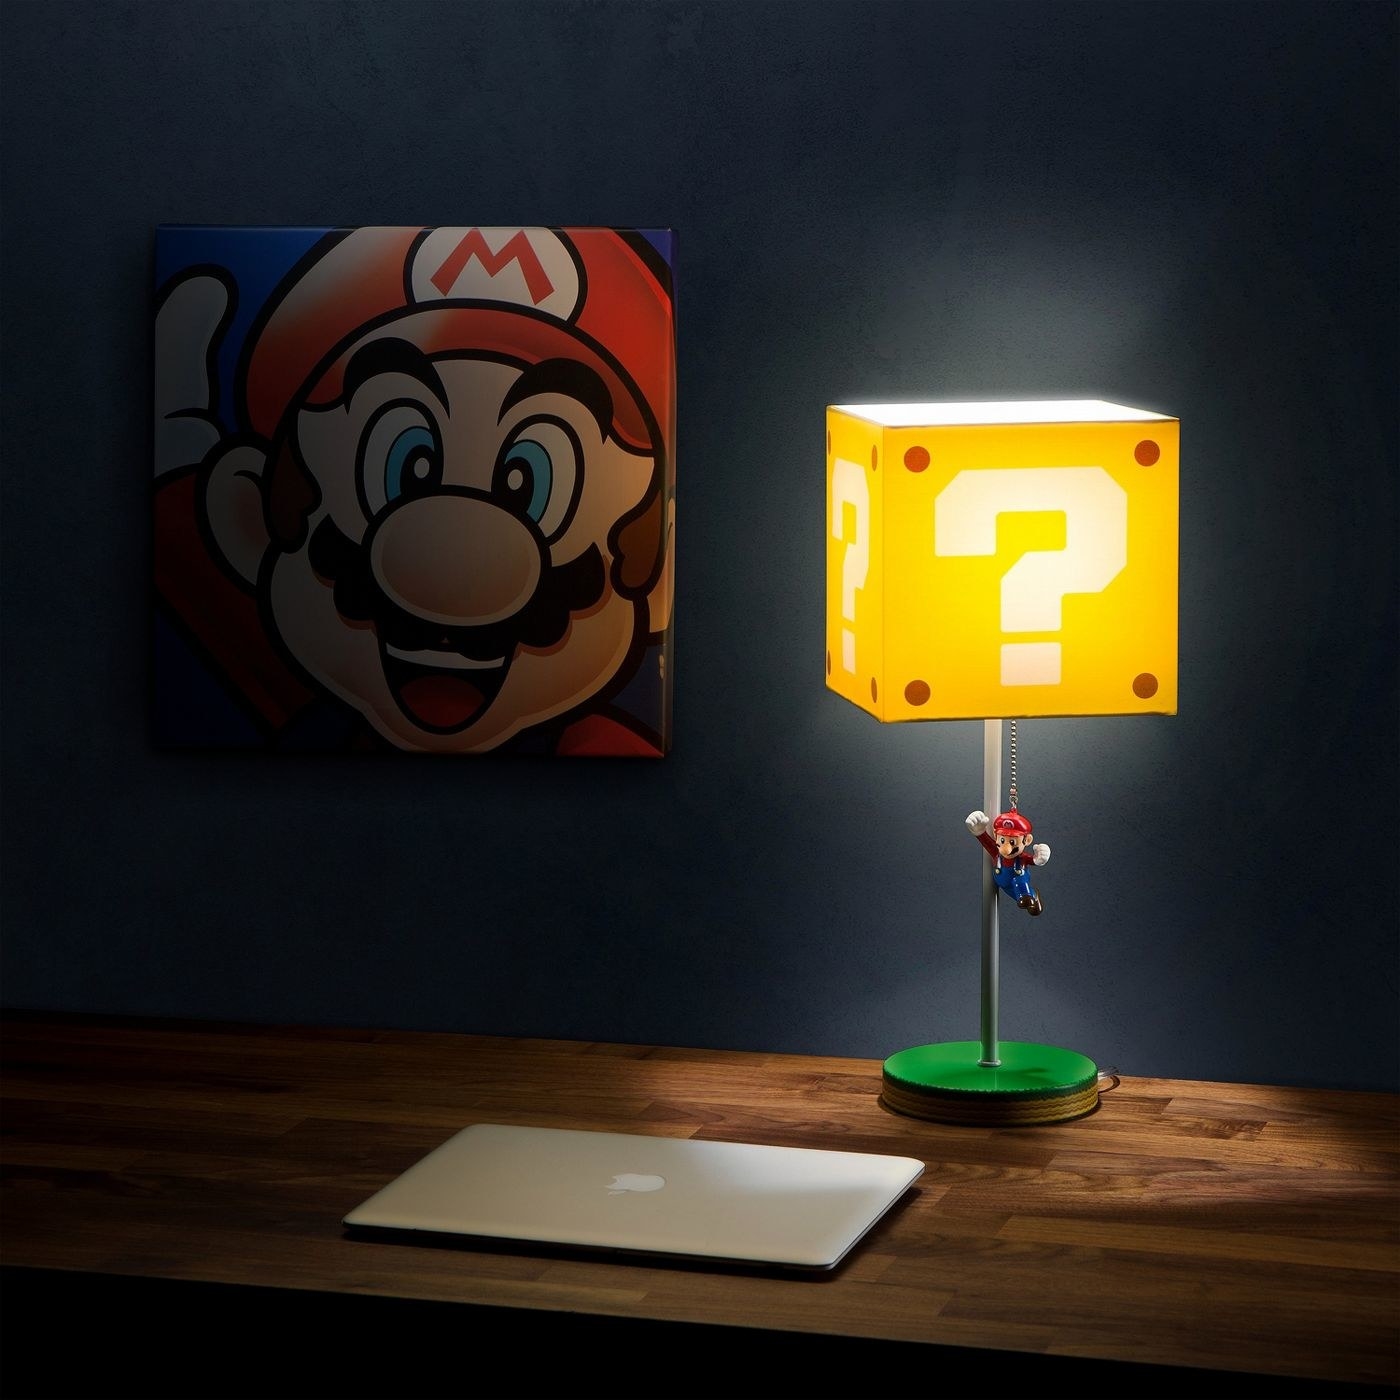 The lamp on a desk